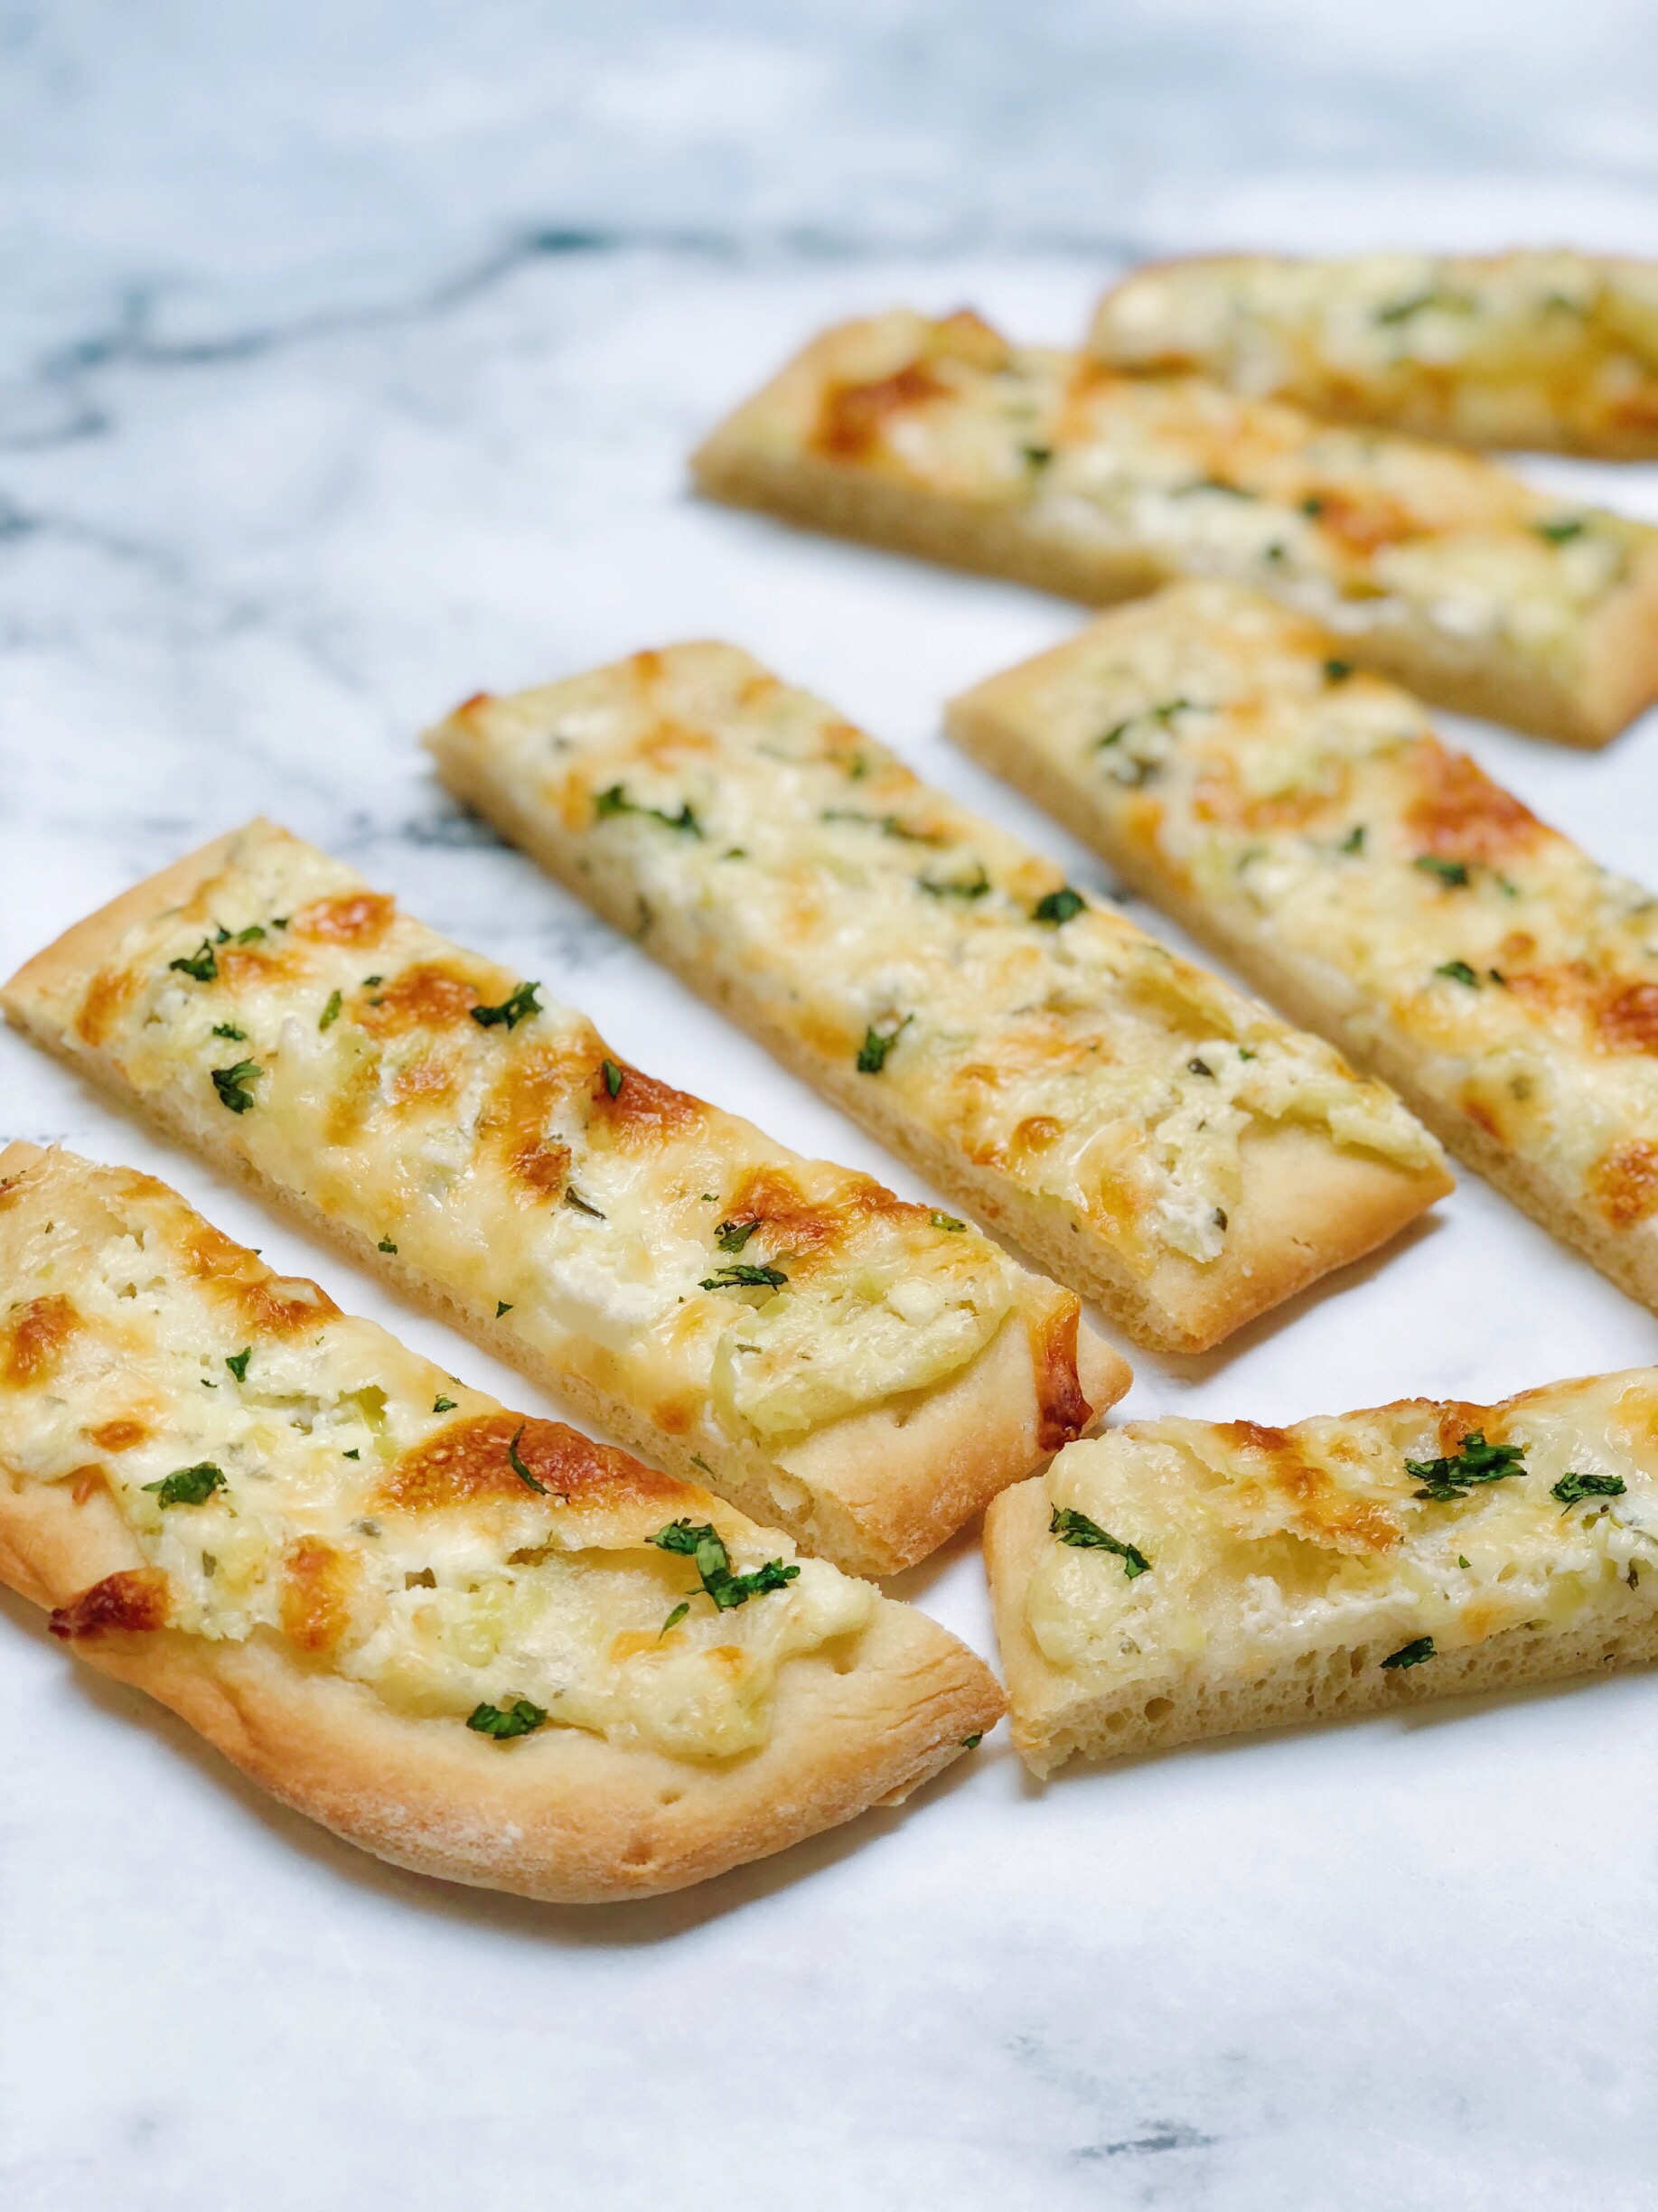 Dish of Spicy Pepper and Cheese Flatbread